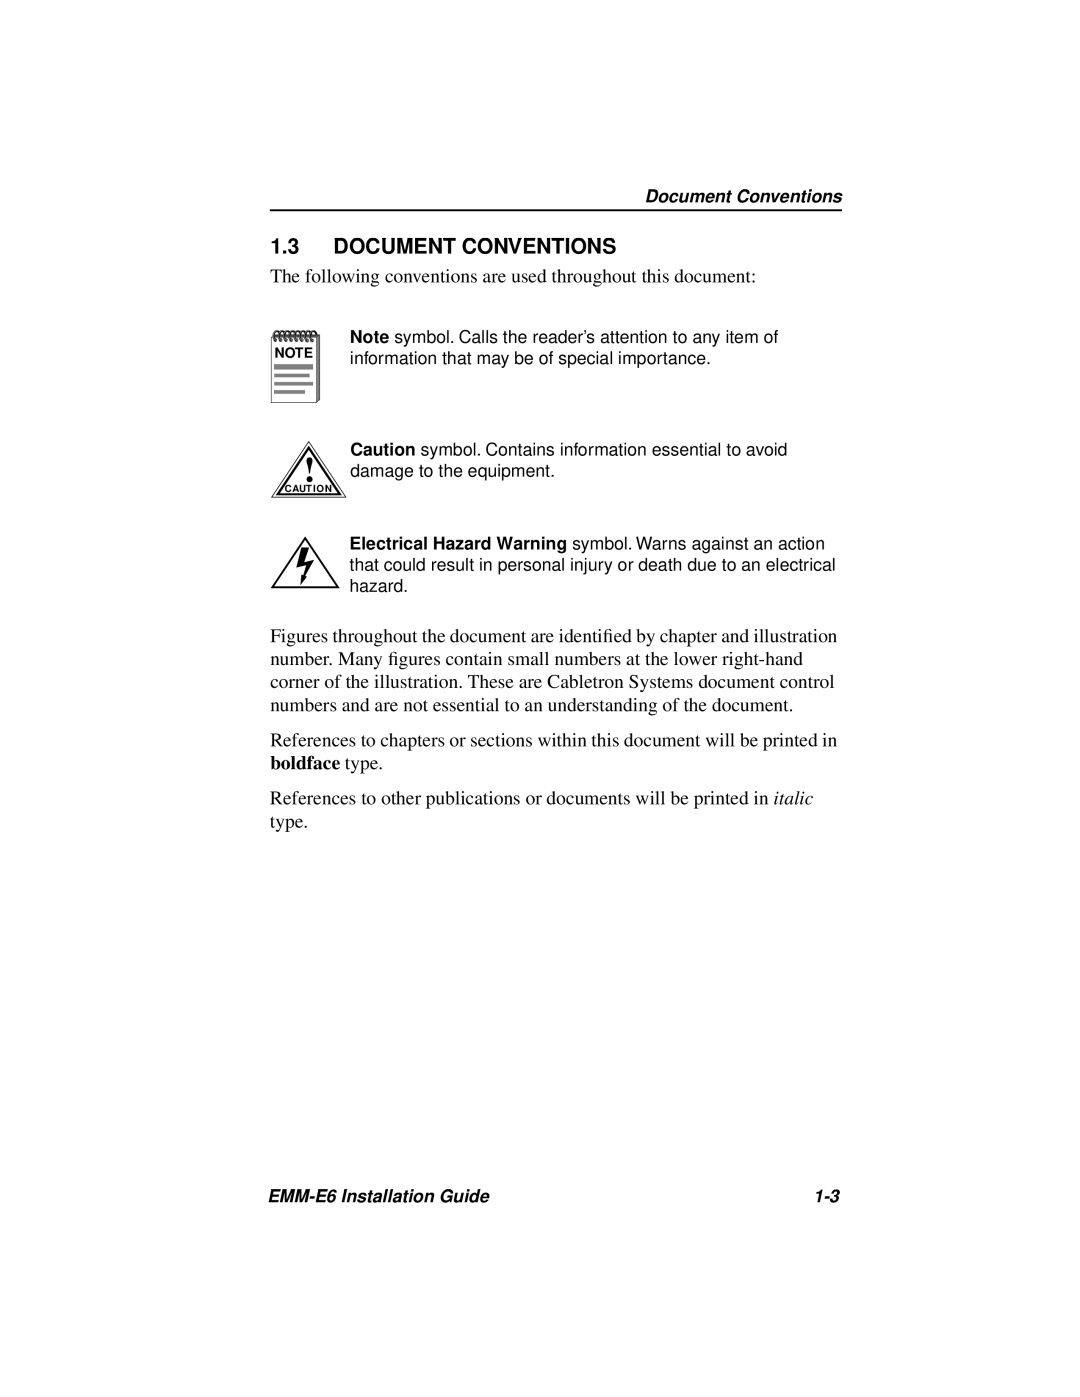 Cabletron Systems EMM-E6 manual Document Conventions 